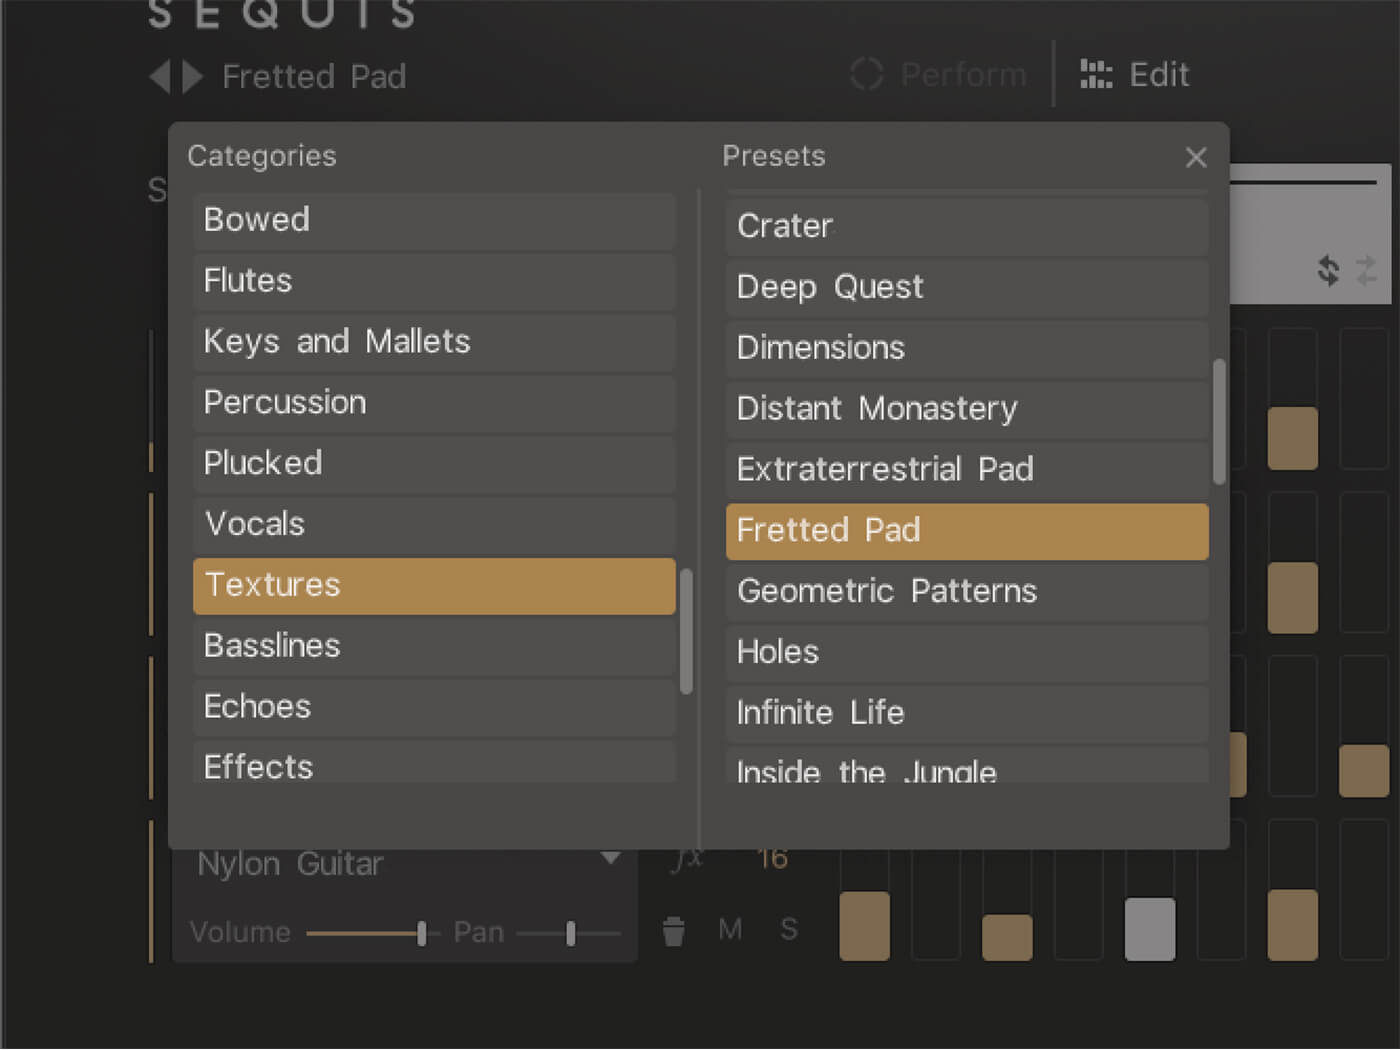 Native Instruments / Orchestral Tools Sequis